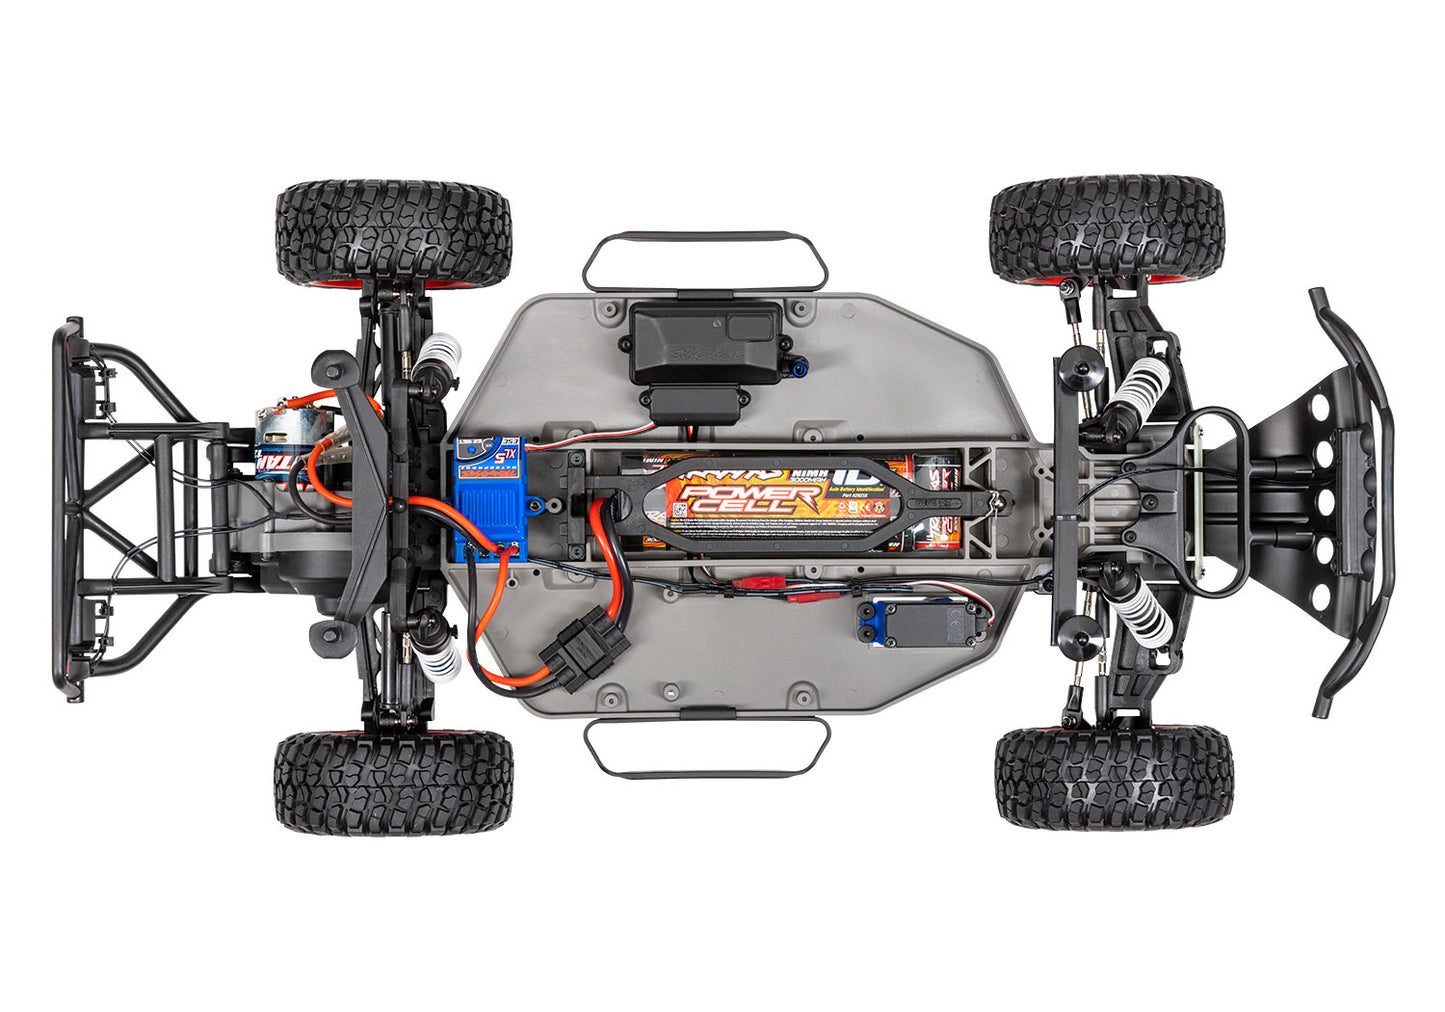 Traxxas Slash RTR 2WD Brushed with Battery & Charger Green LED